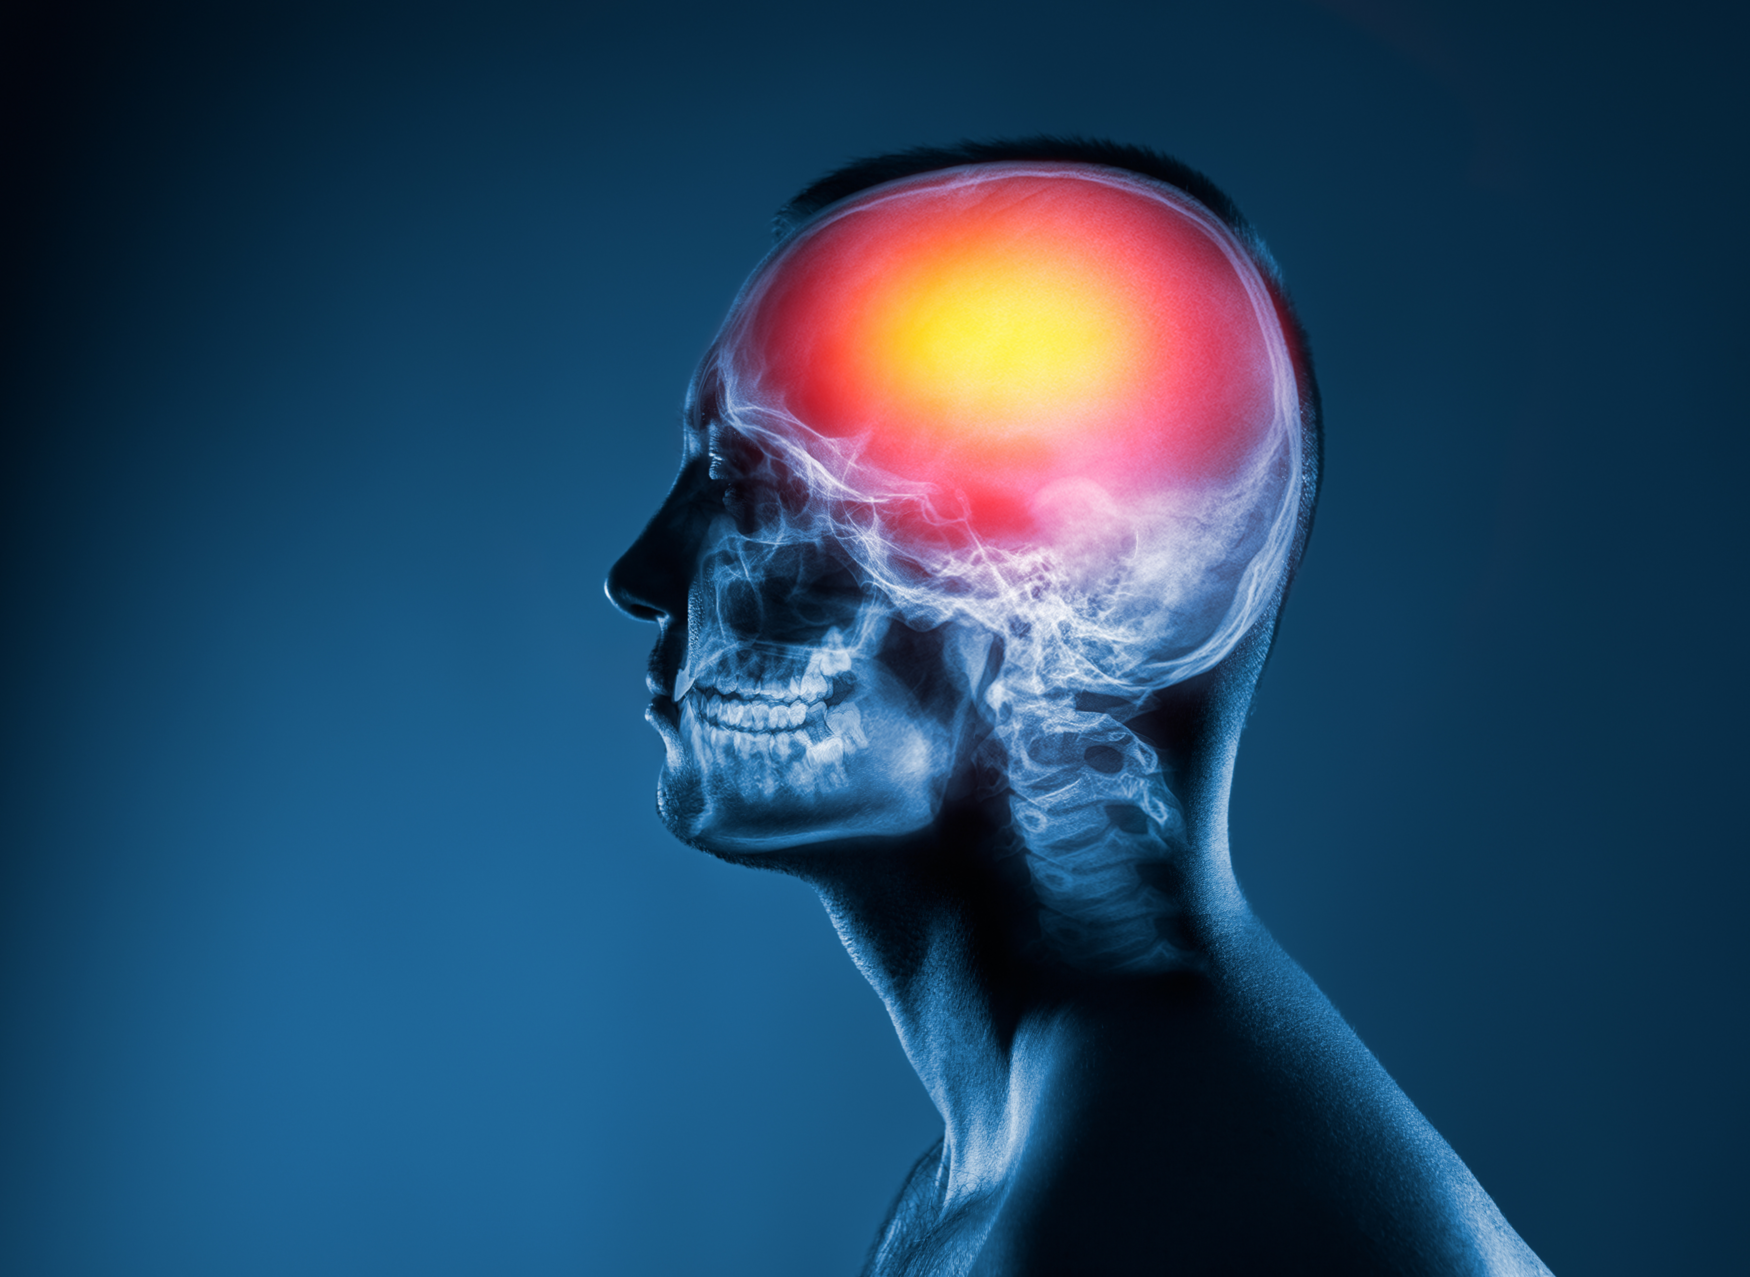 A profile x-ray of the upper half of a man's head. The bones of his skull can be seen. The area around his brain case glows red.